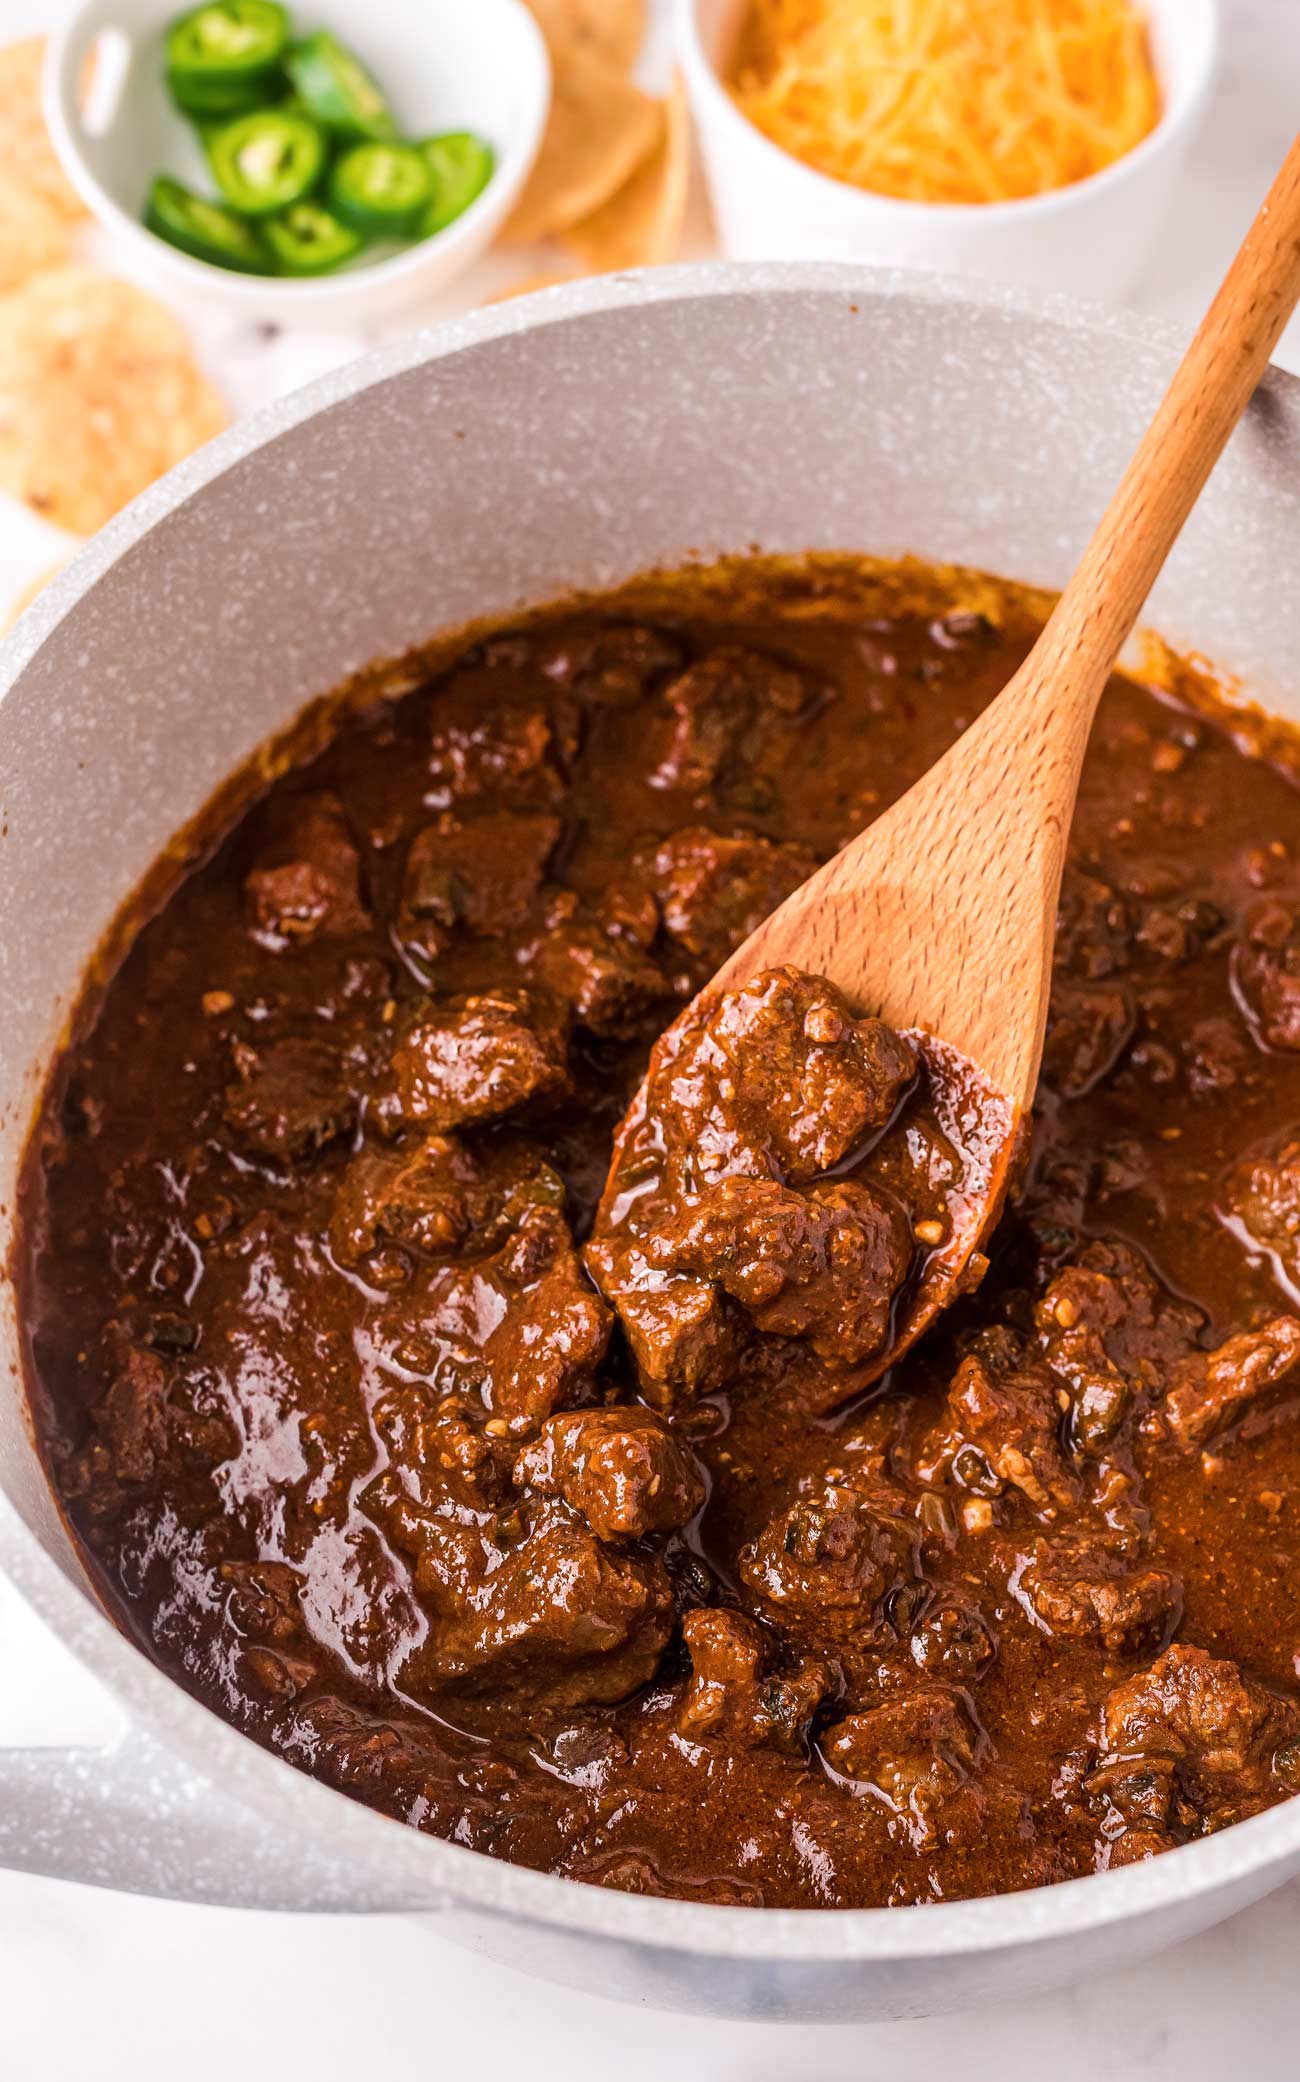 Texas-Style Chili (chili con carne) - The Chunky Chef